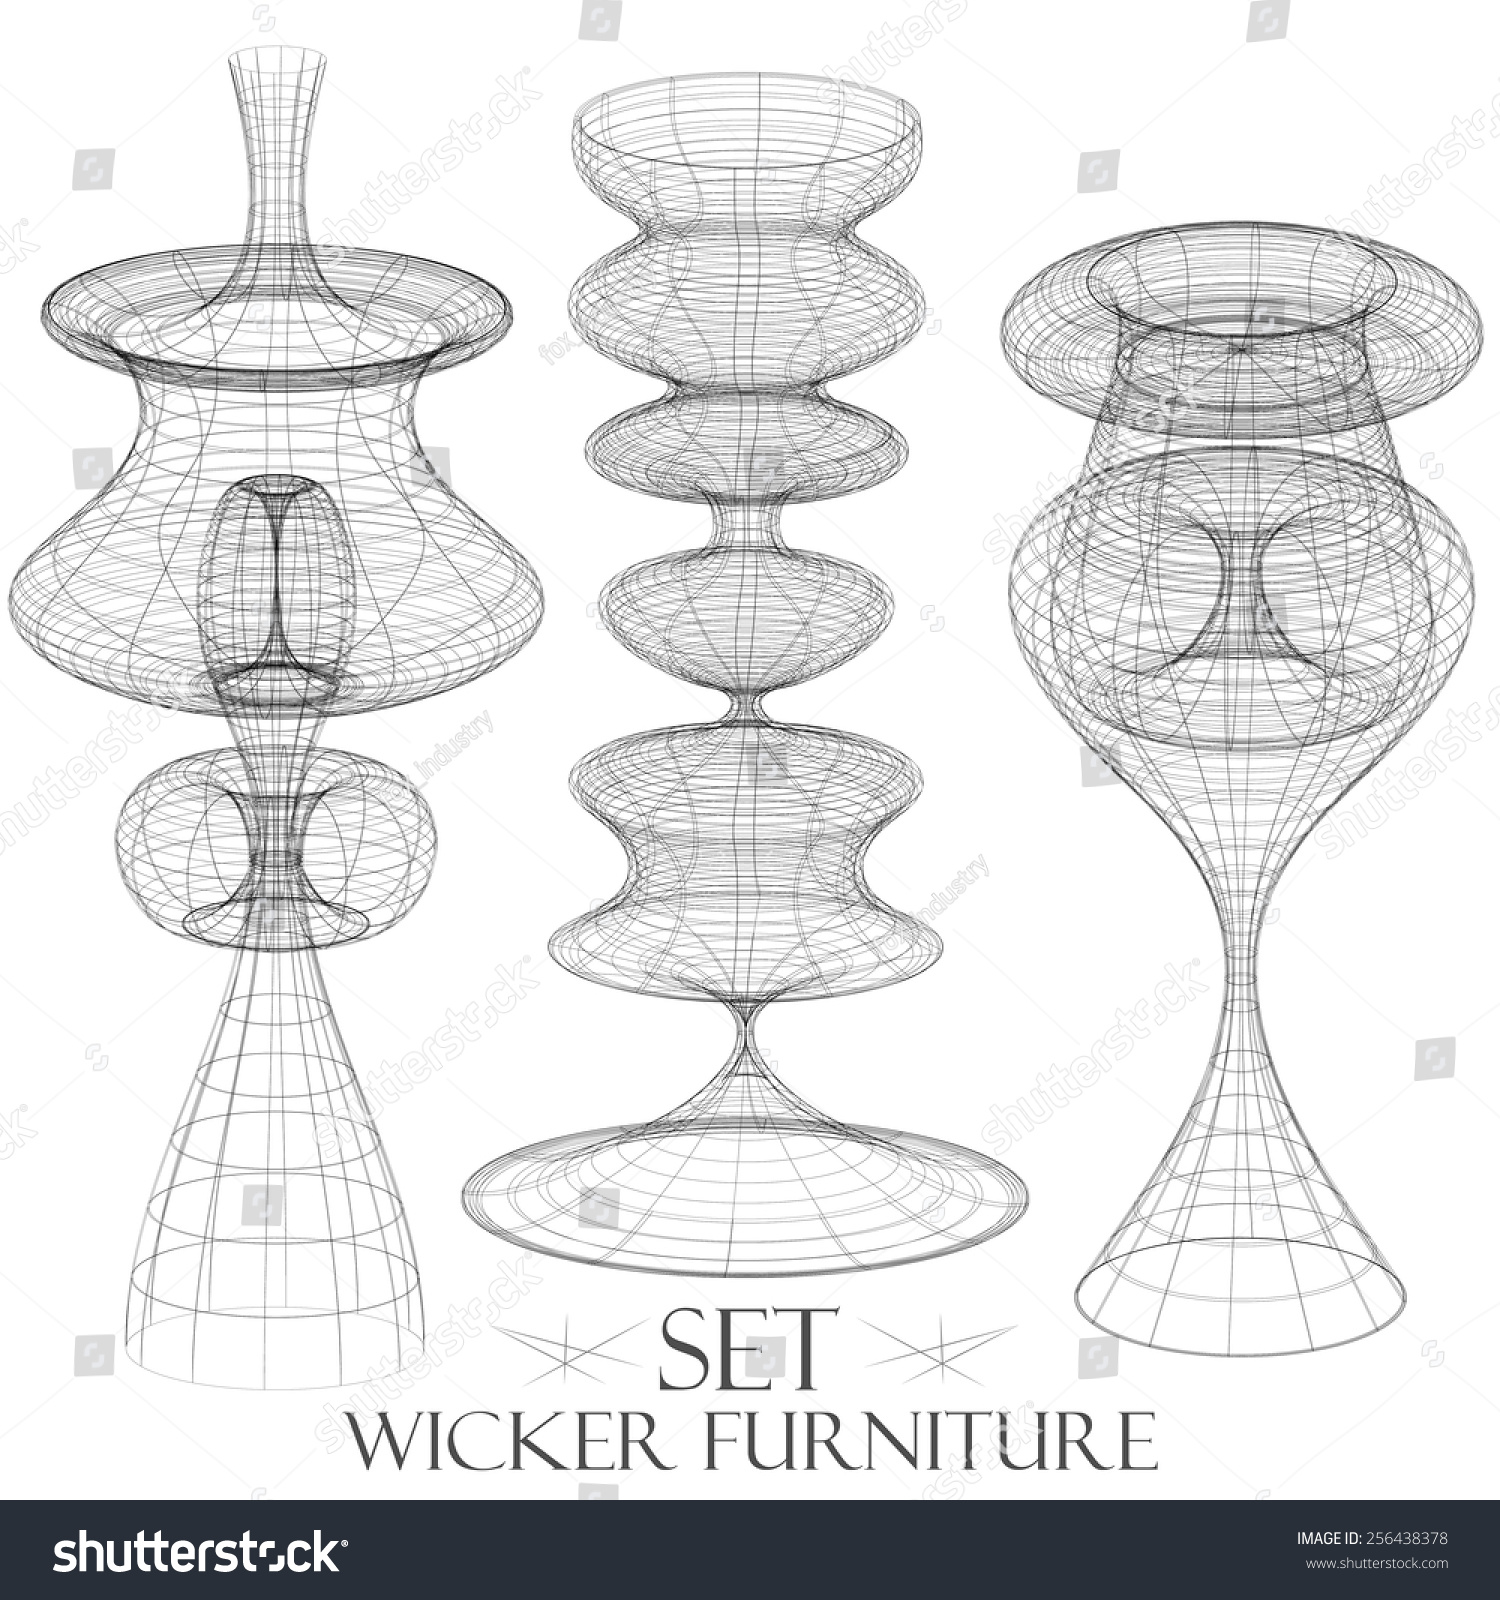 SVG of Set of wicker furniture chandelier drawings of objects vintage things vector svg